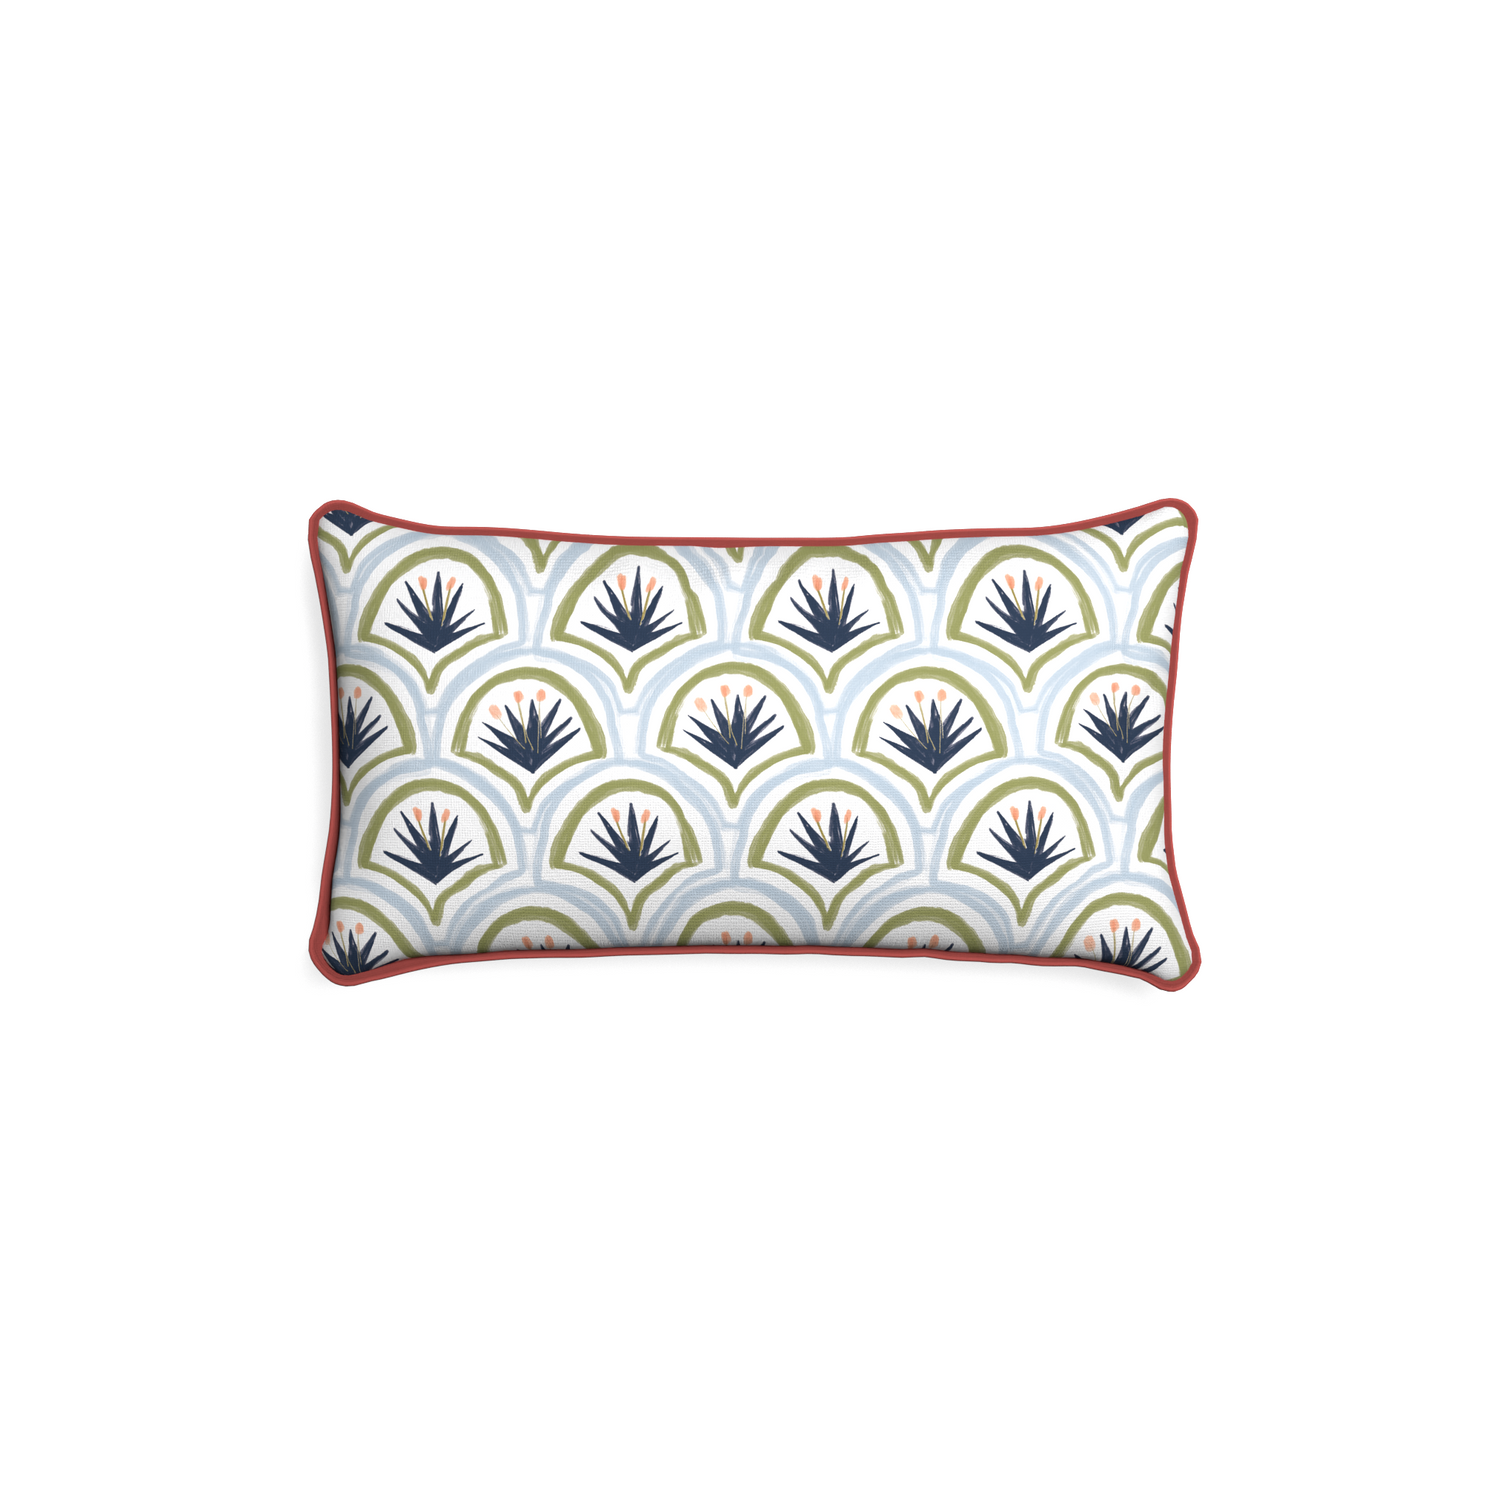 Petite-lumbar thatcher midnight custom art deco palm patternpillow with c piping on white background